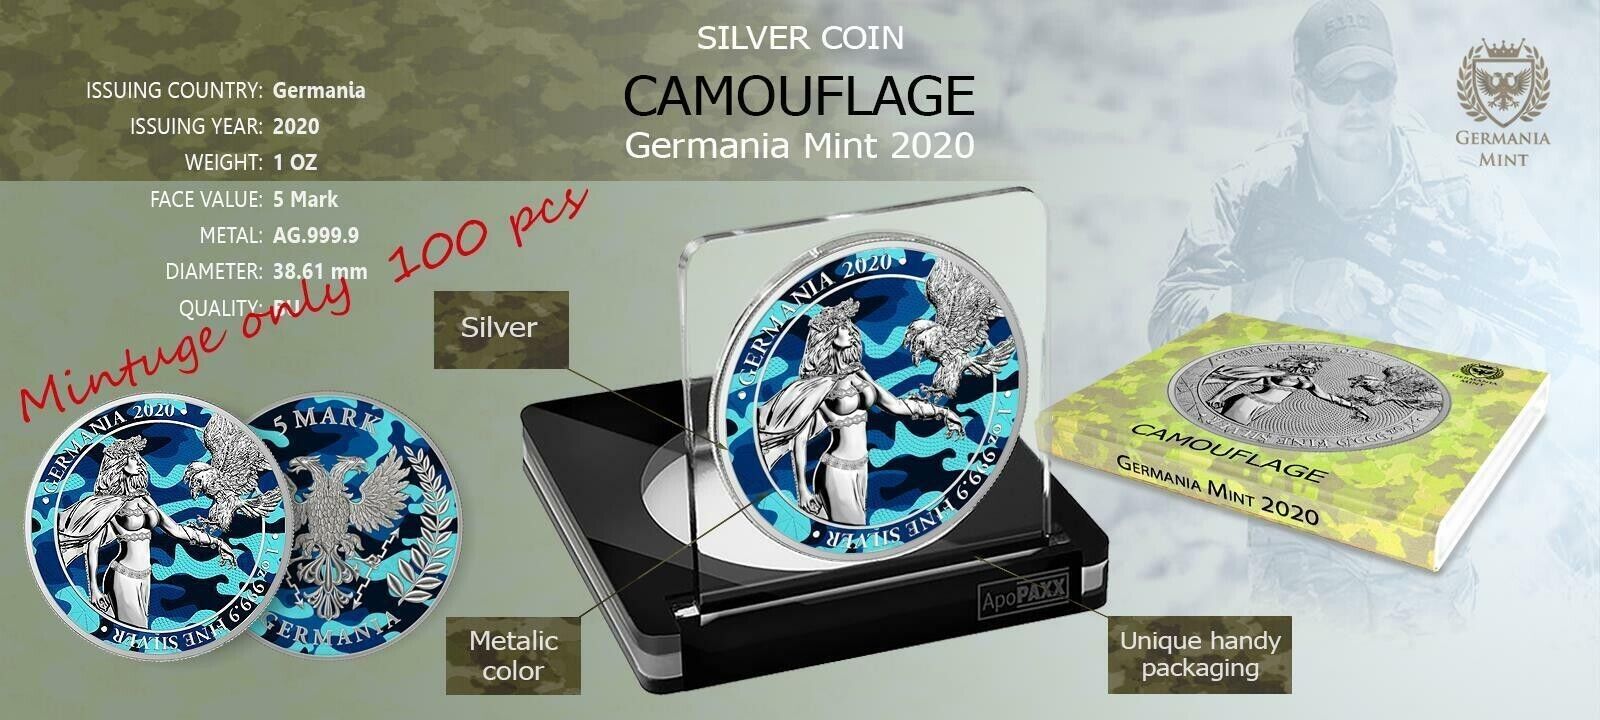 1 Oz Silver Coin 2020 5 Mark Germania Camouflage Edition - Air Force-classypw.com-4